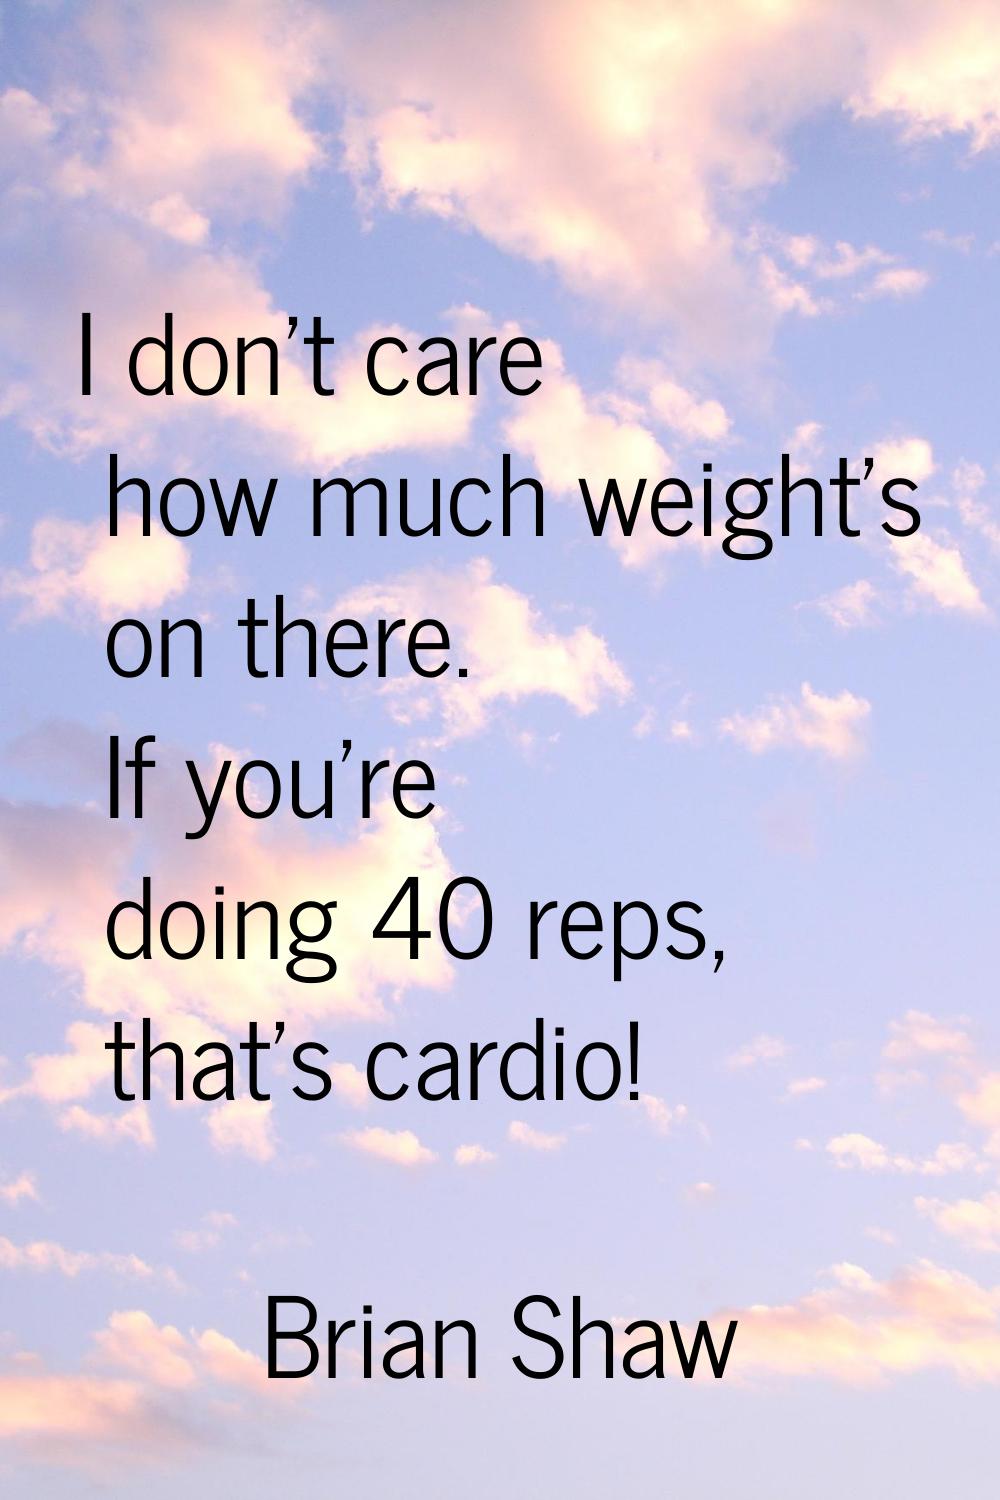 I don't care how much weight's on there. If you're doing 40 reps, that's cardio!